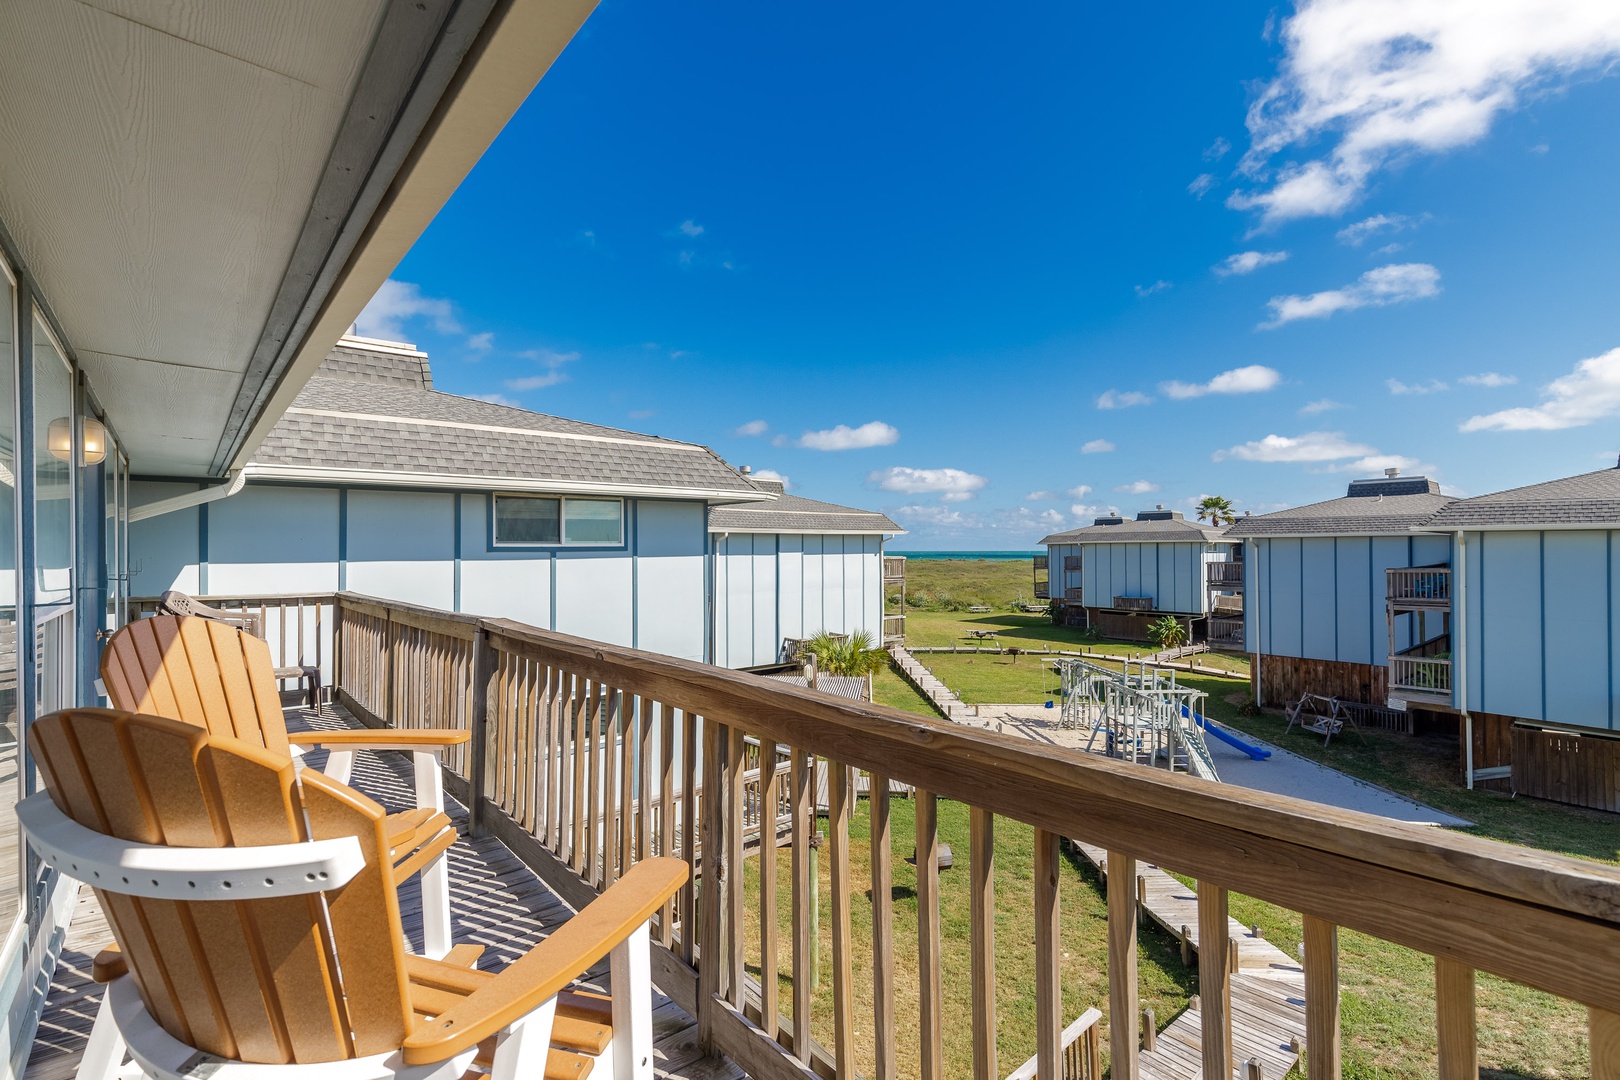 Expansive view of the ocean, dunes and playscape from the spacious deck